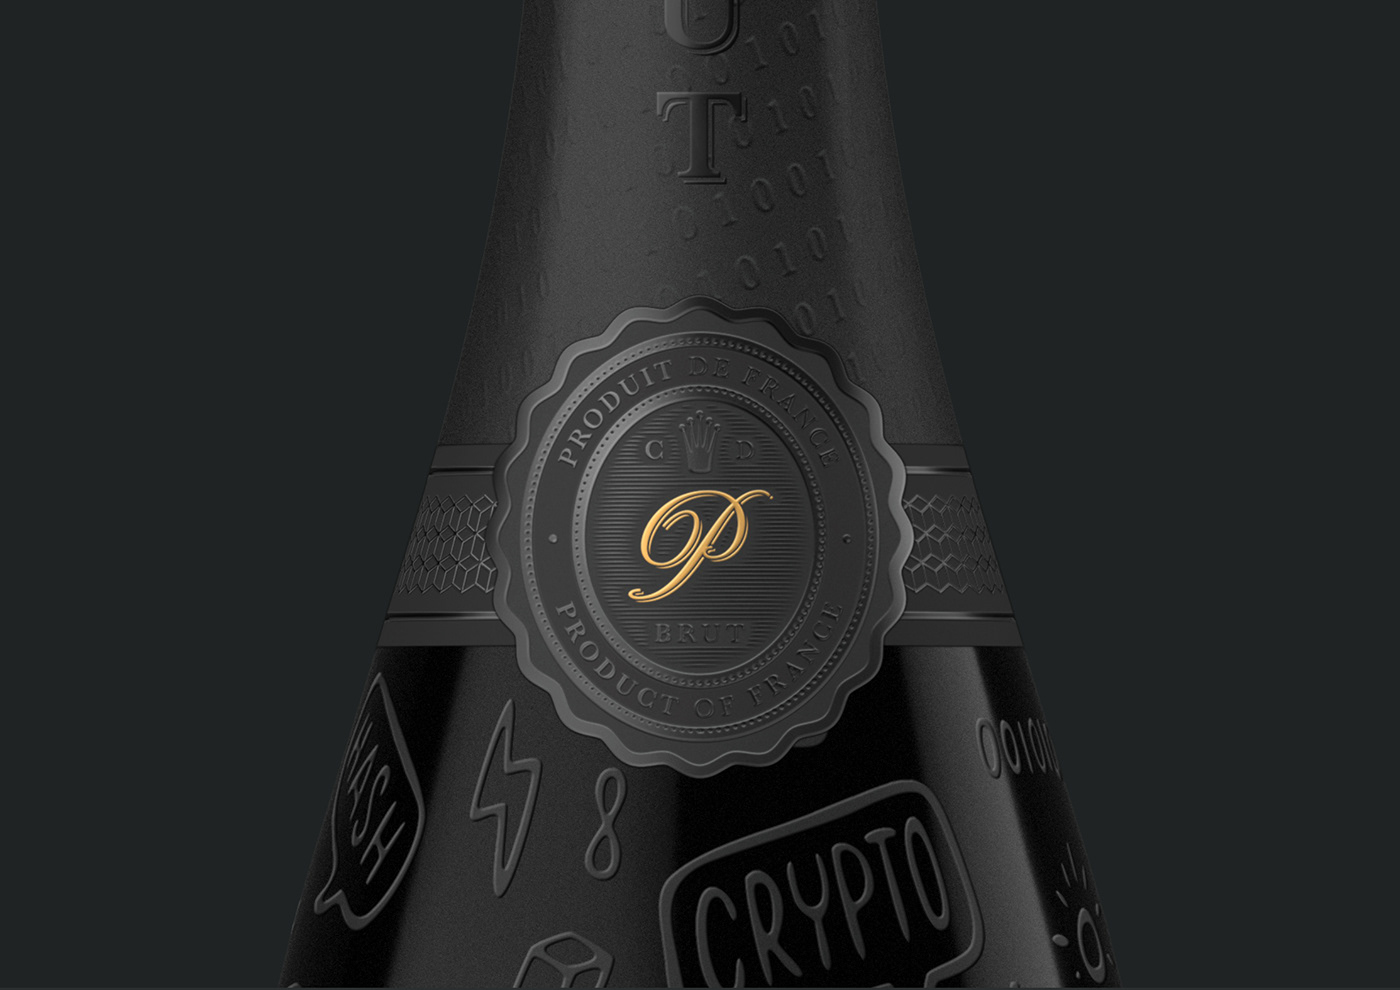 alchohol Champagne label design packaging design typography   visual identity